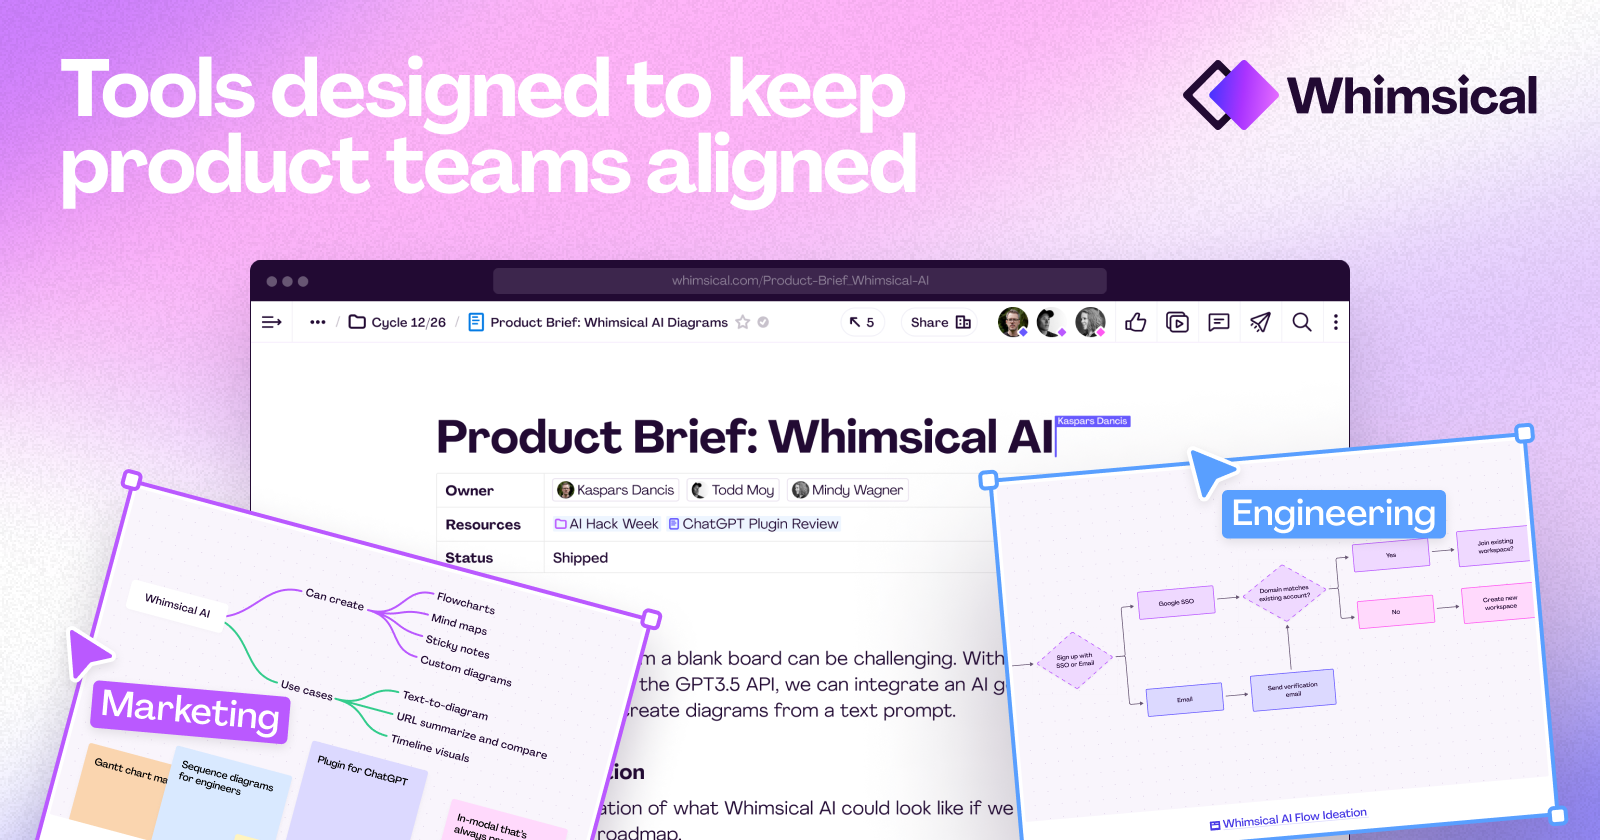 Can’t get over how excellent @Whimsical is. We use it religiously for wireframing and thought-vomit. I’m not sure I can think without it— a true